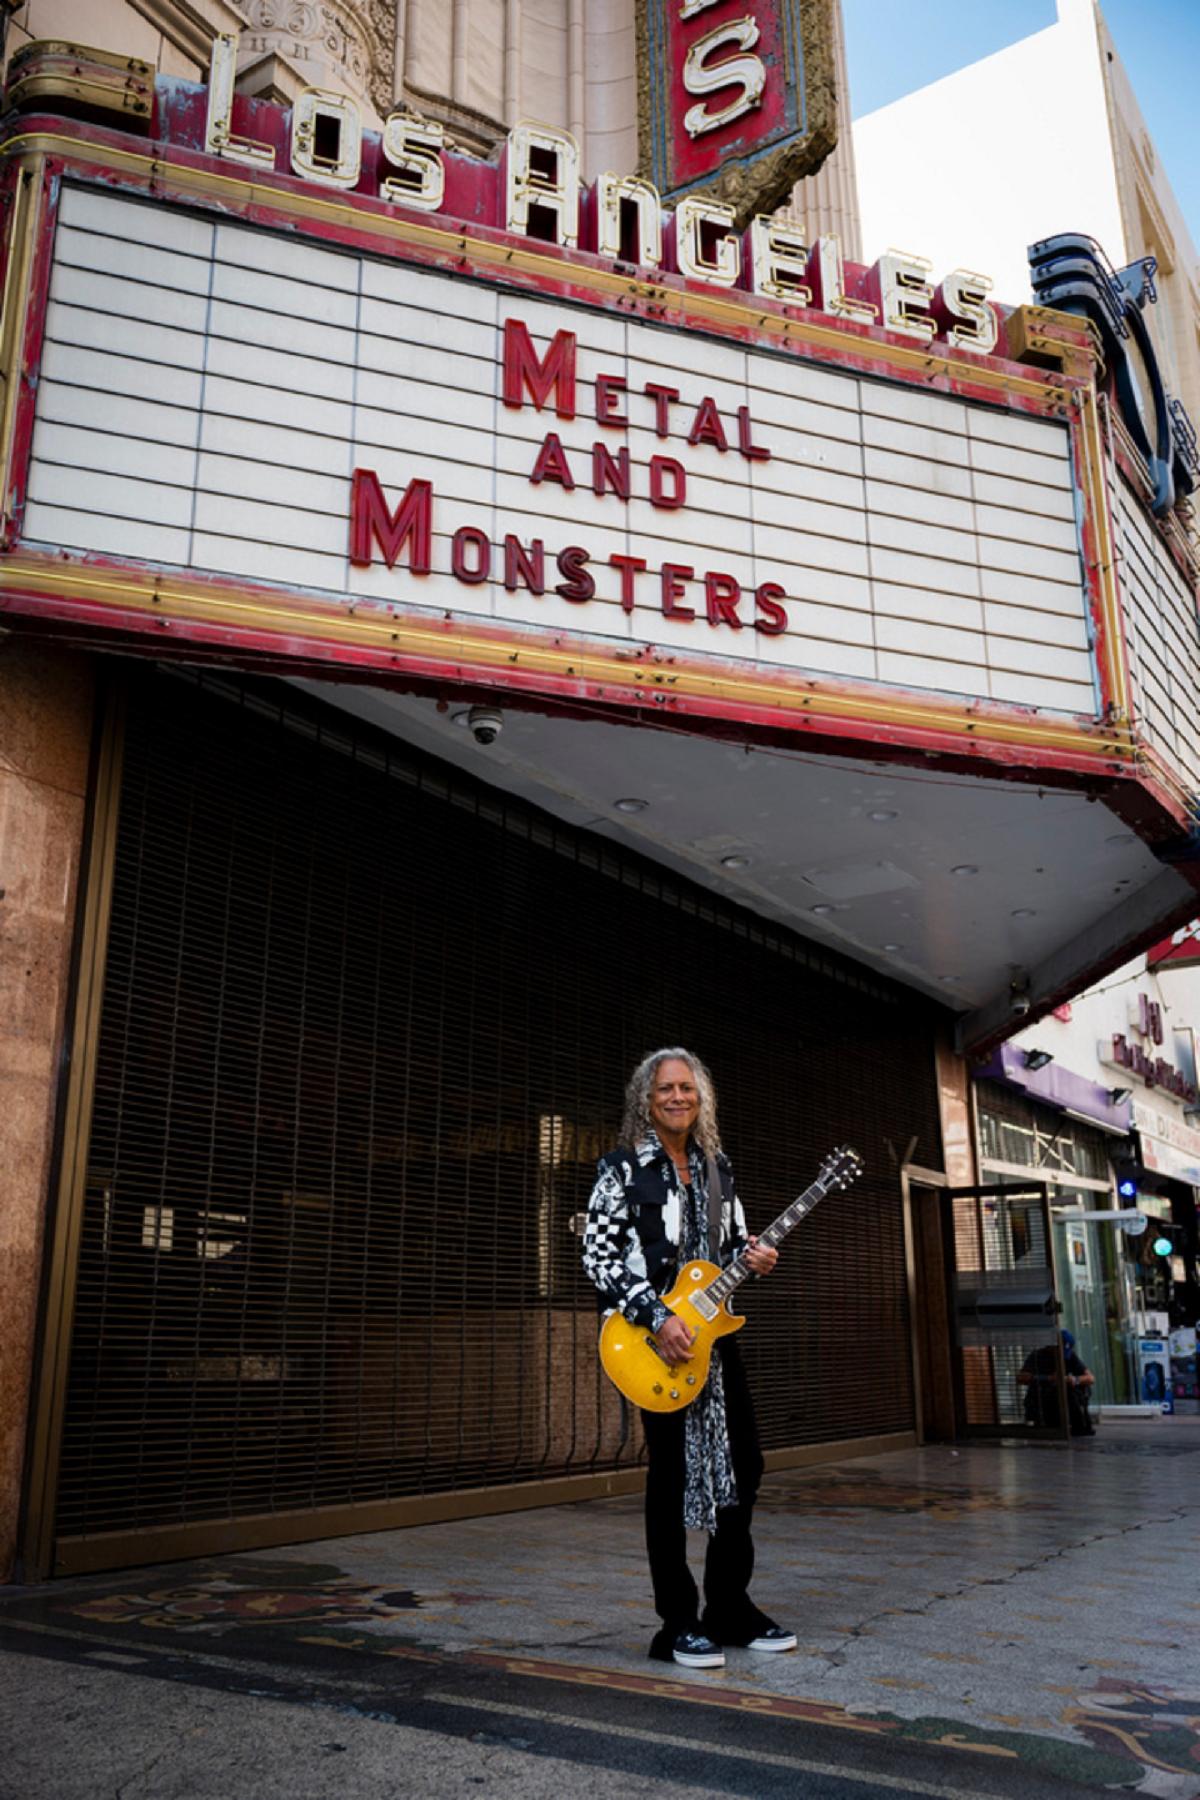 Gibson TV’s “Metal and Monsters” Halloween Special Features Kirk Hammett of Metallica, a Behind-the-Scenes Tour of Halloween Horror Nights at Universal Studios Hollywood, and More